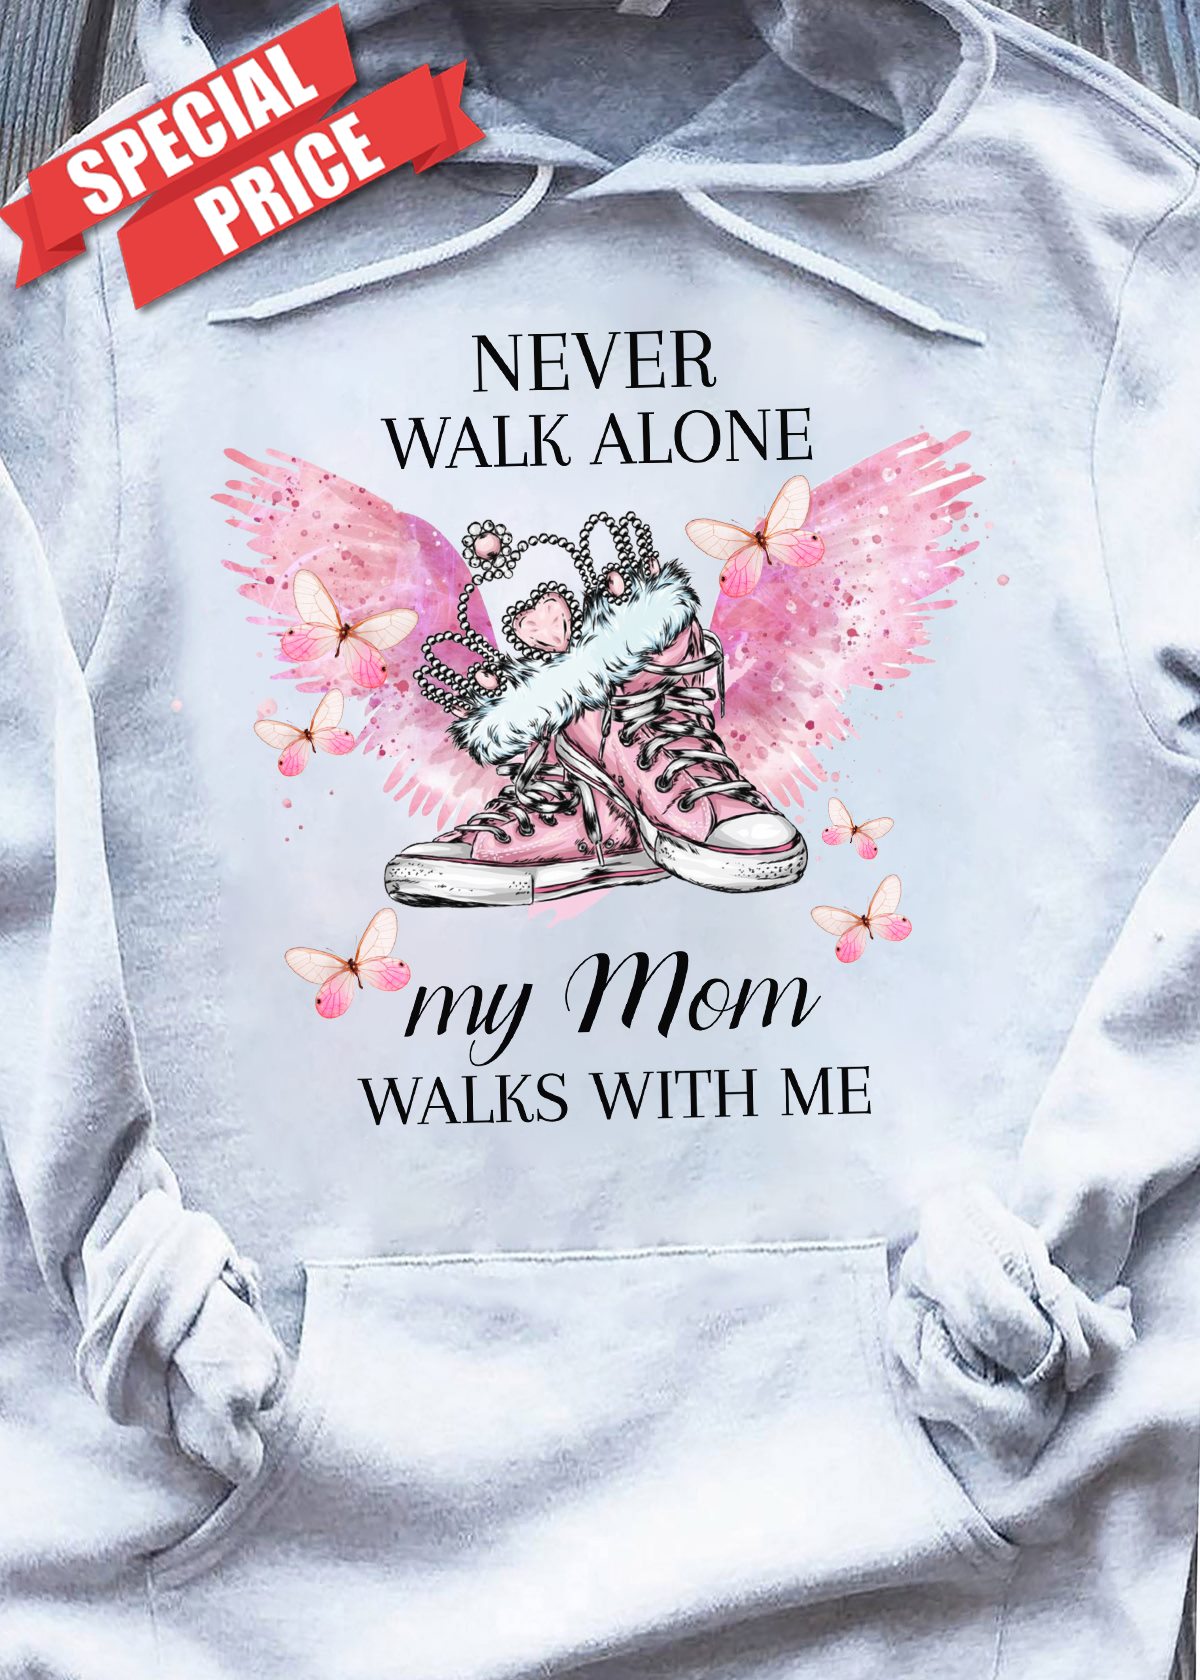 Never walk alone my mom walks with me - Shoes with wings